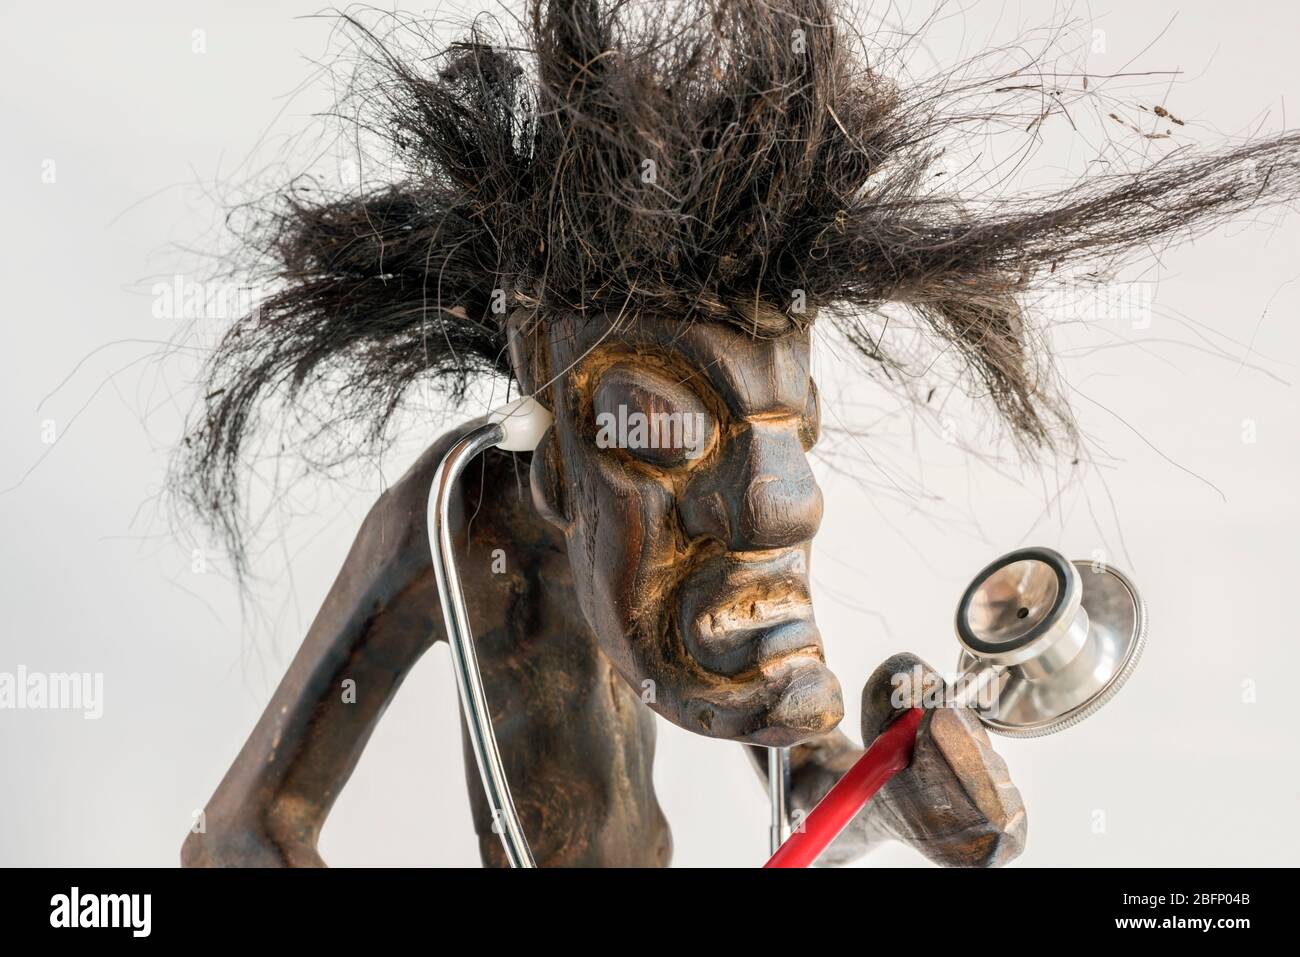 Wooden carved figure of primitive man wearing straw skirt & long black tousled hair, with stethoscope. Concept; Aspiration, Ambition, Social mobility. Stock Photo